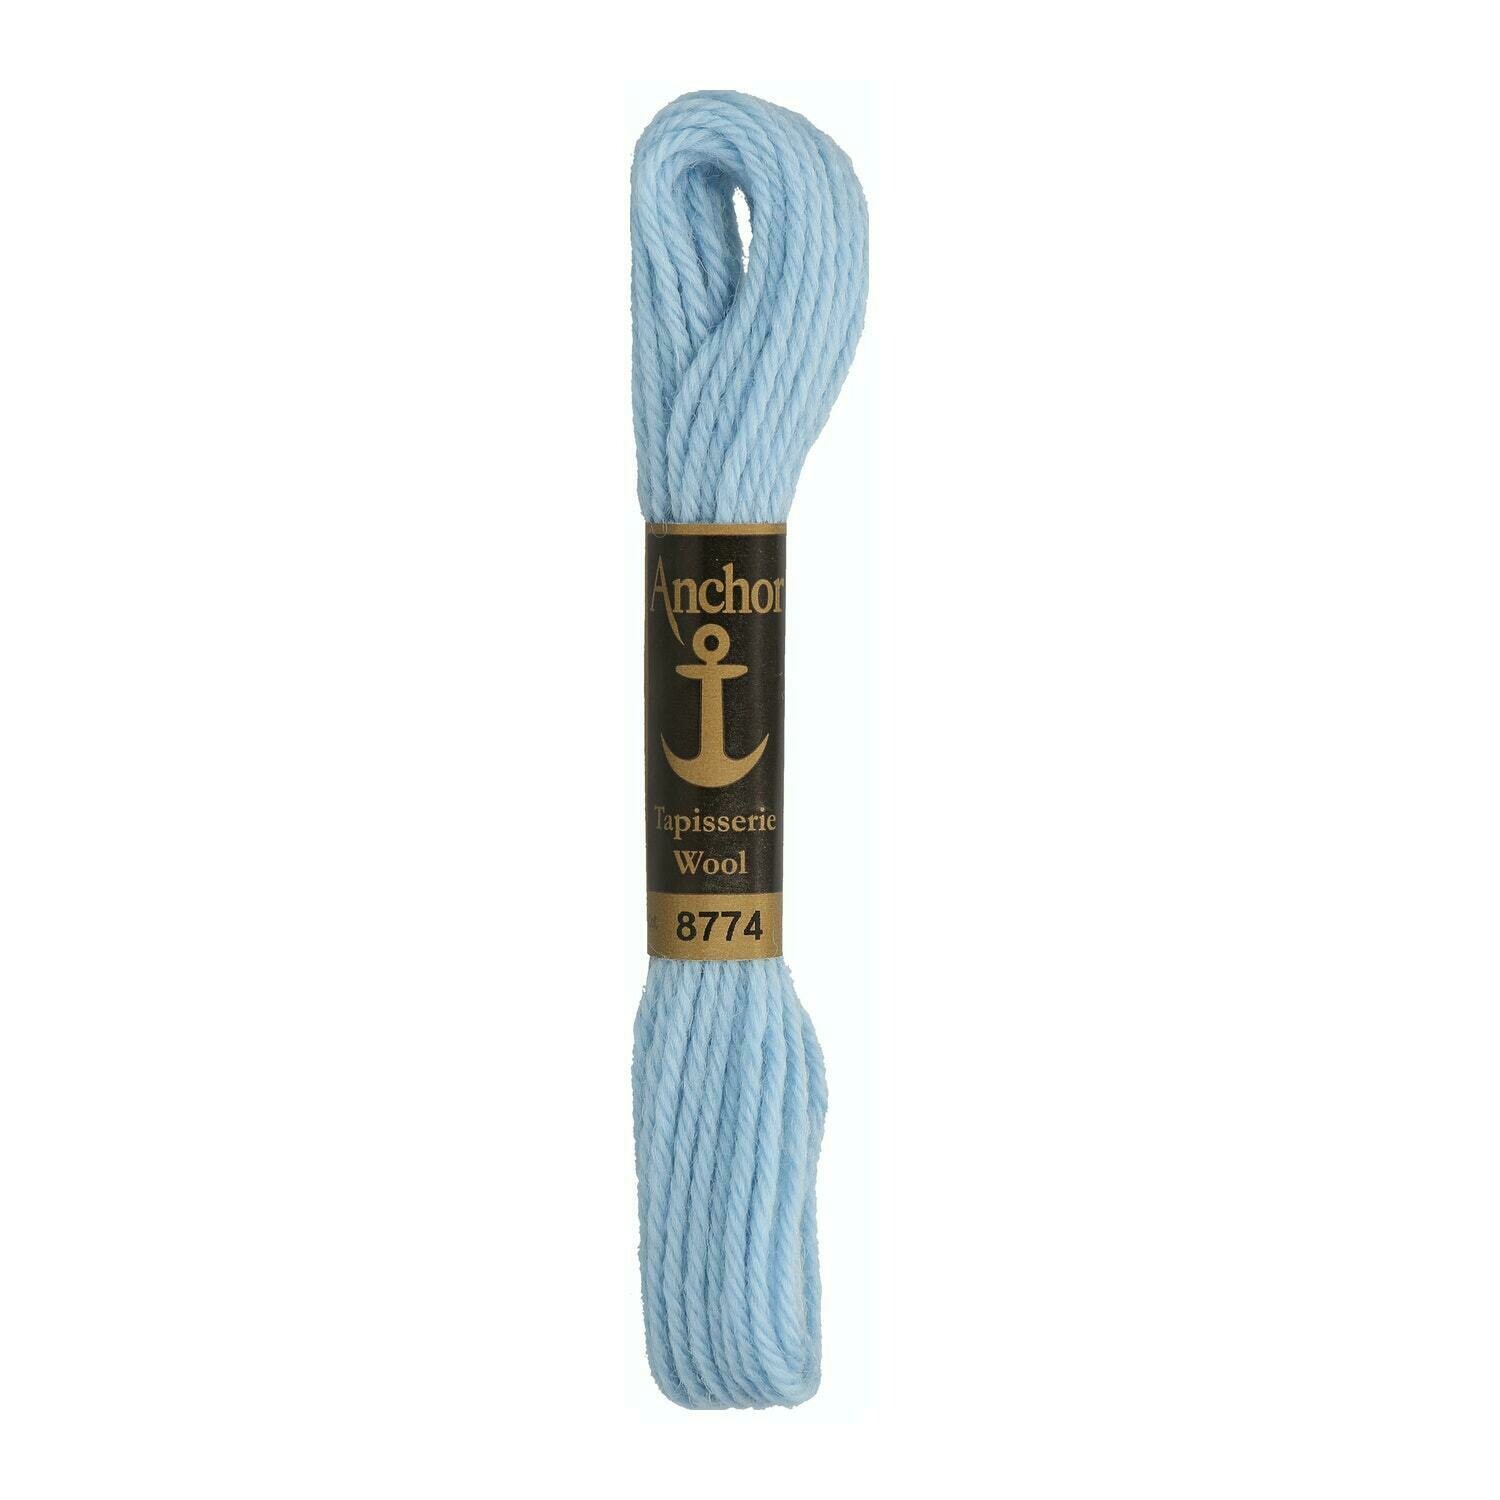 Anchor Tapisserie Wool #08774